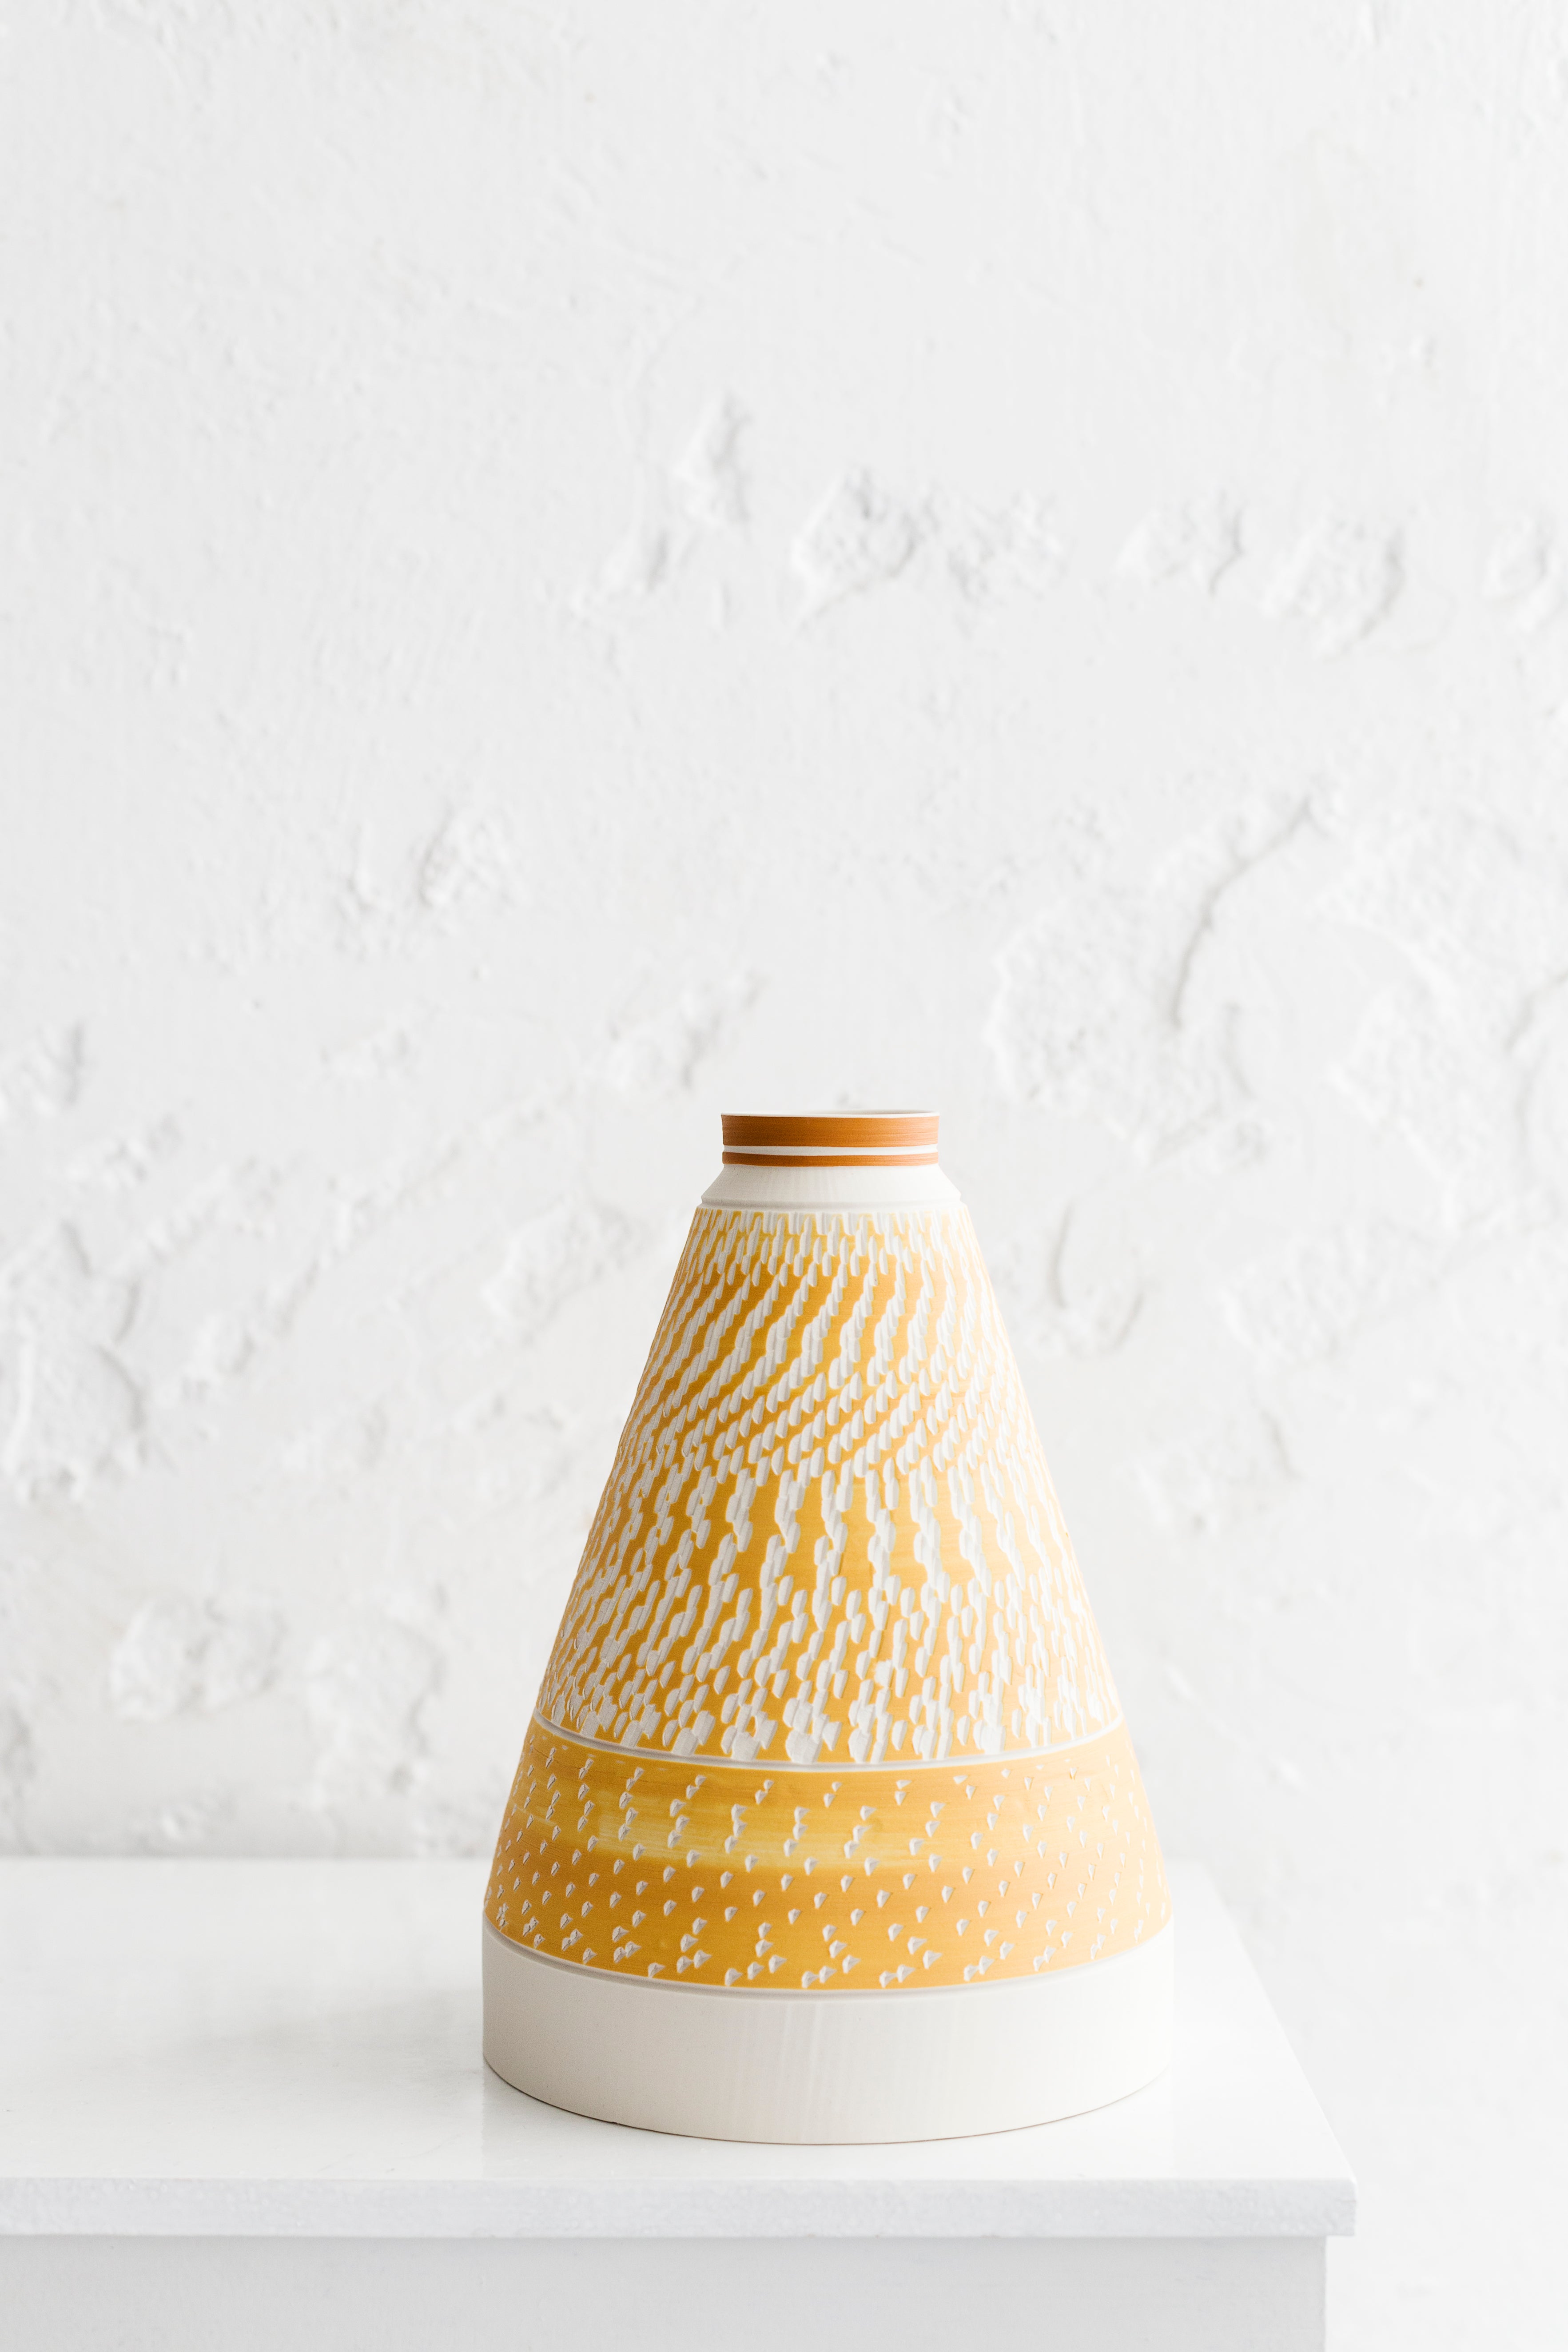 Tall white pyramid vase with chattering decoration